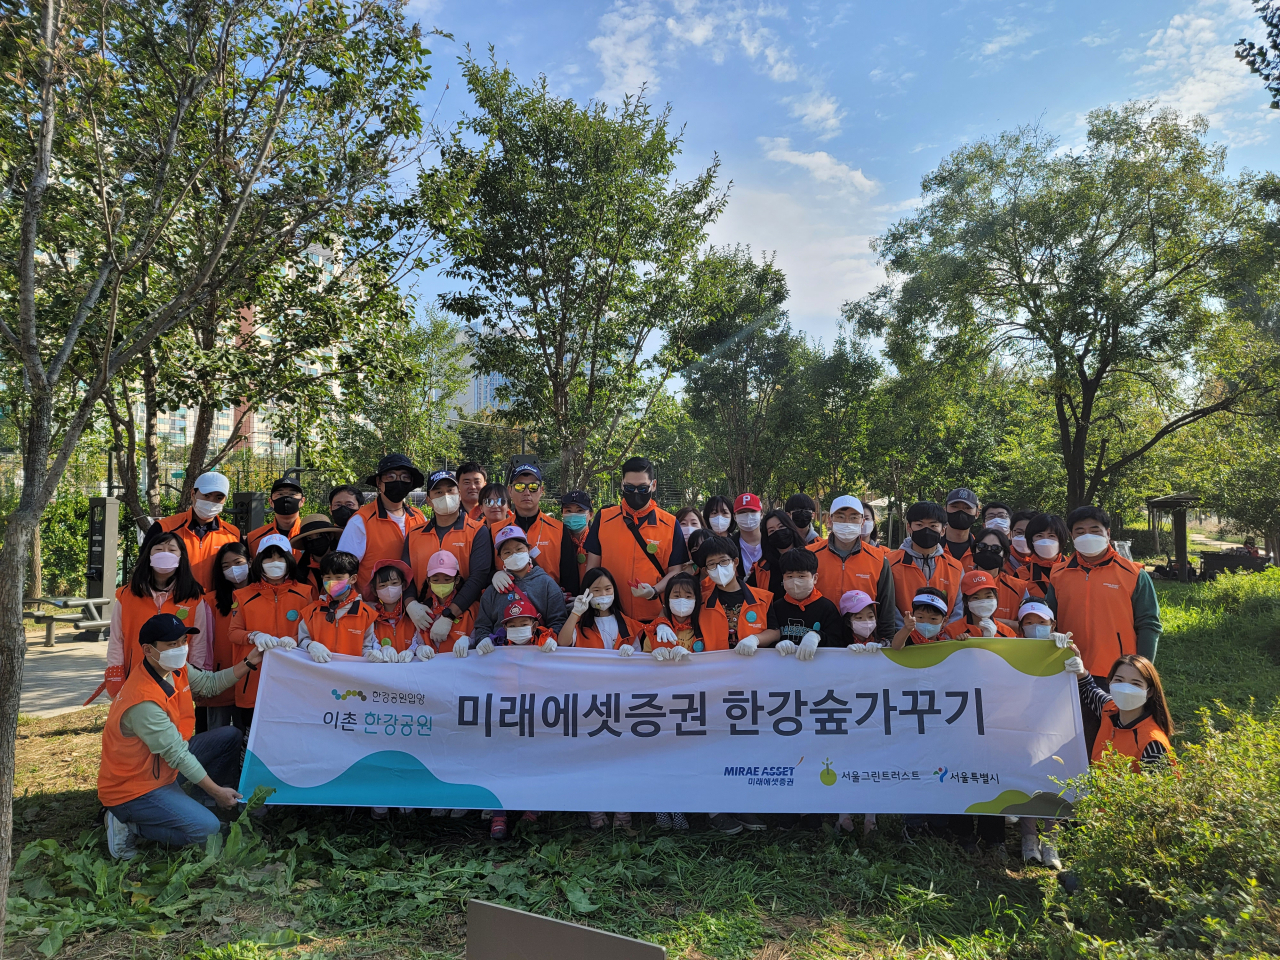 Mirae Asset Securities employees and their family members pose for a photo after a planting event held along the Han River in Seoul. (Mirae Asset Securities)